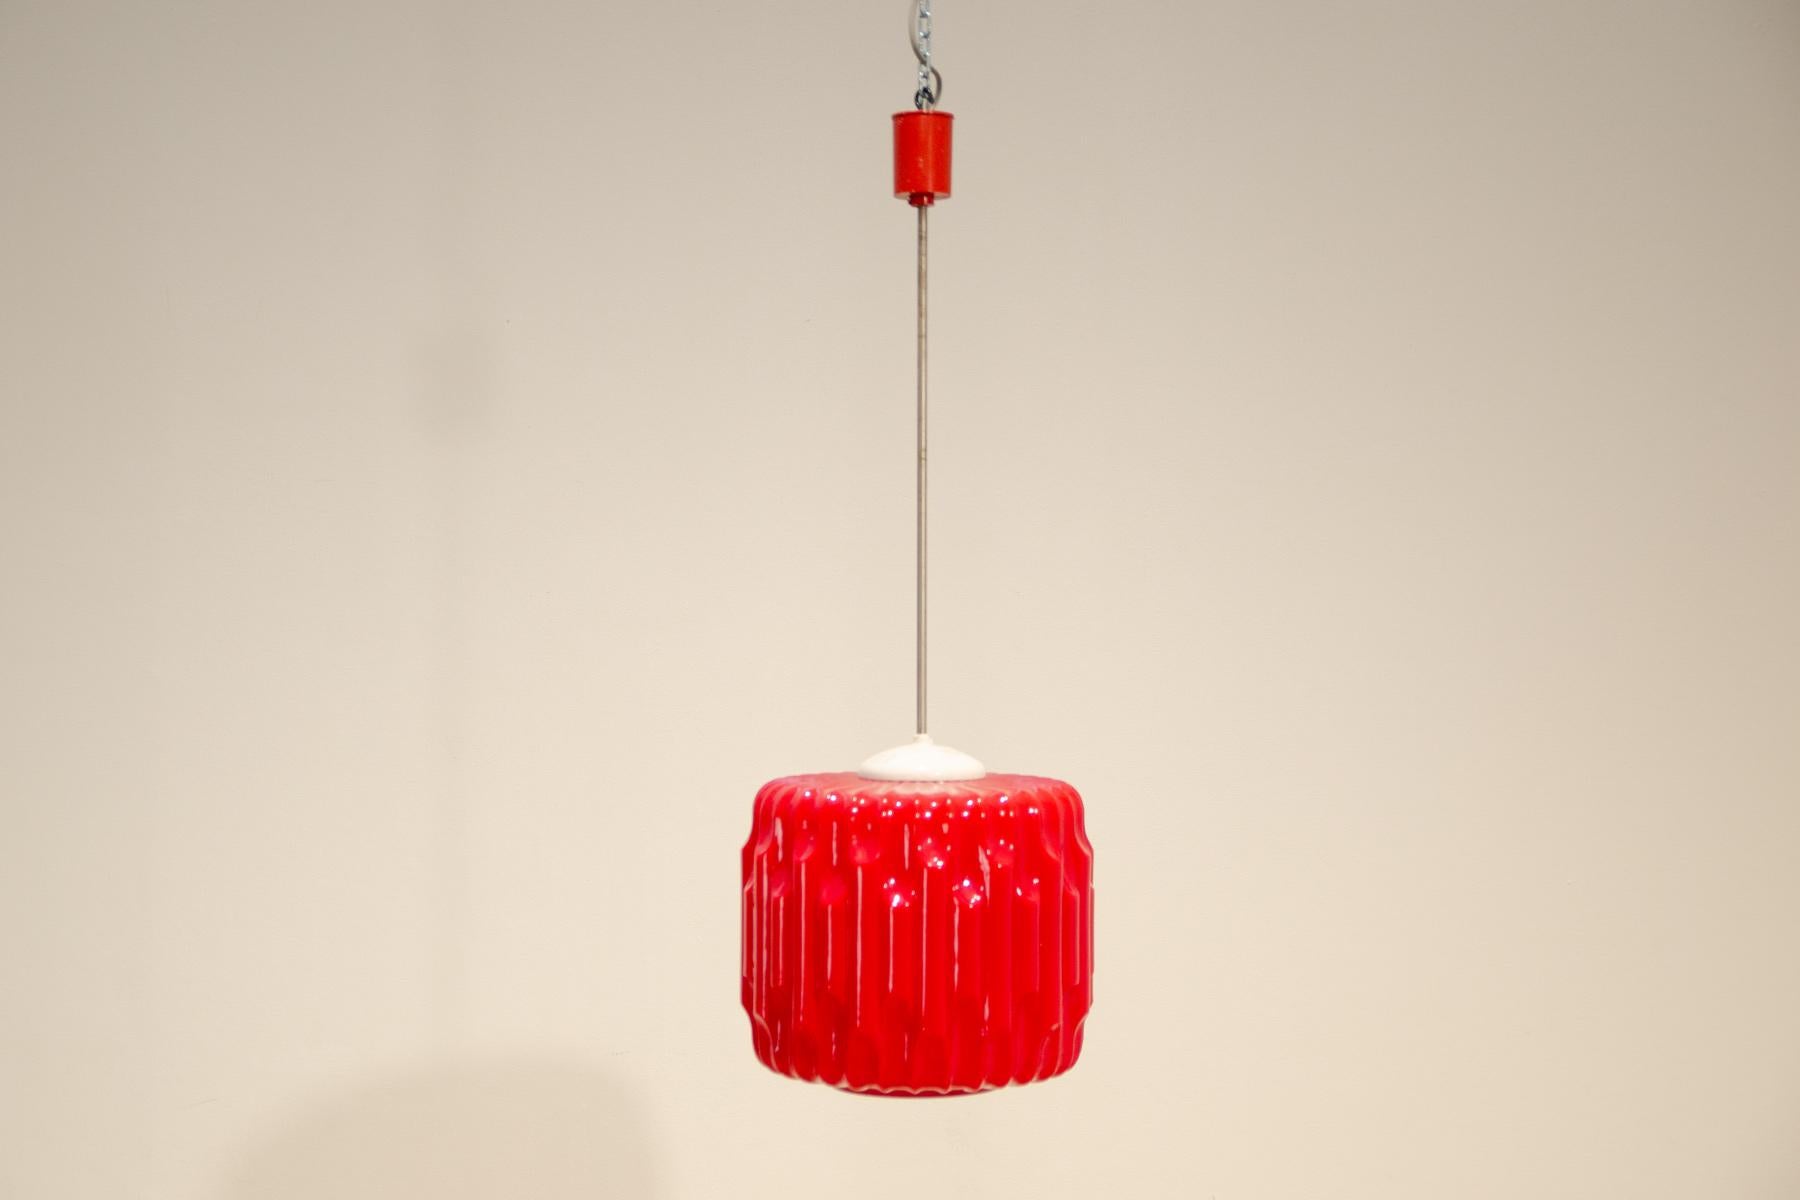 Brutalist opaline glass chandelier in a raspberry look designed by Czechoslovak architect Karl Wolf in the 1970s for the company Osvětlovací sklo company. Made of red opal glass and chrome construction. In excellent condition, fully functional, new